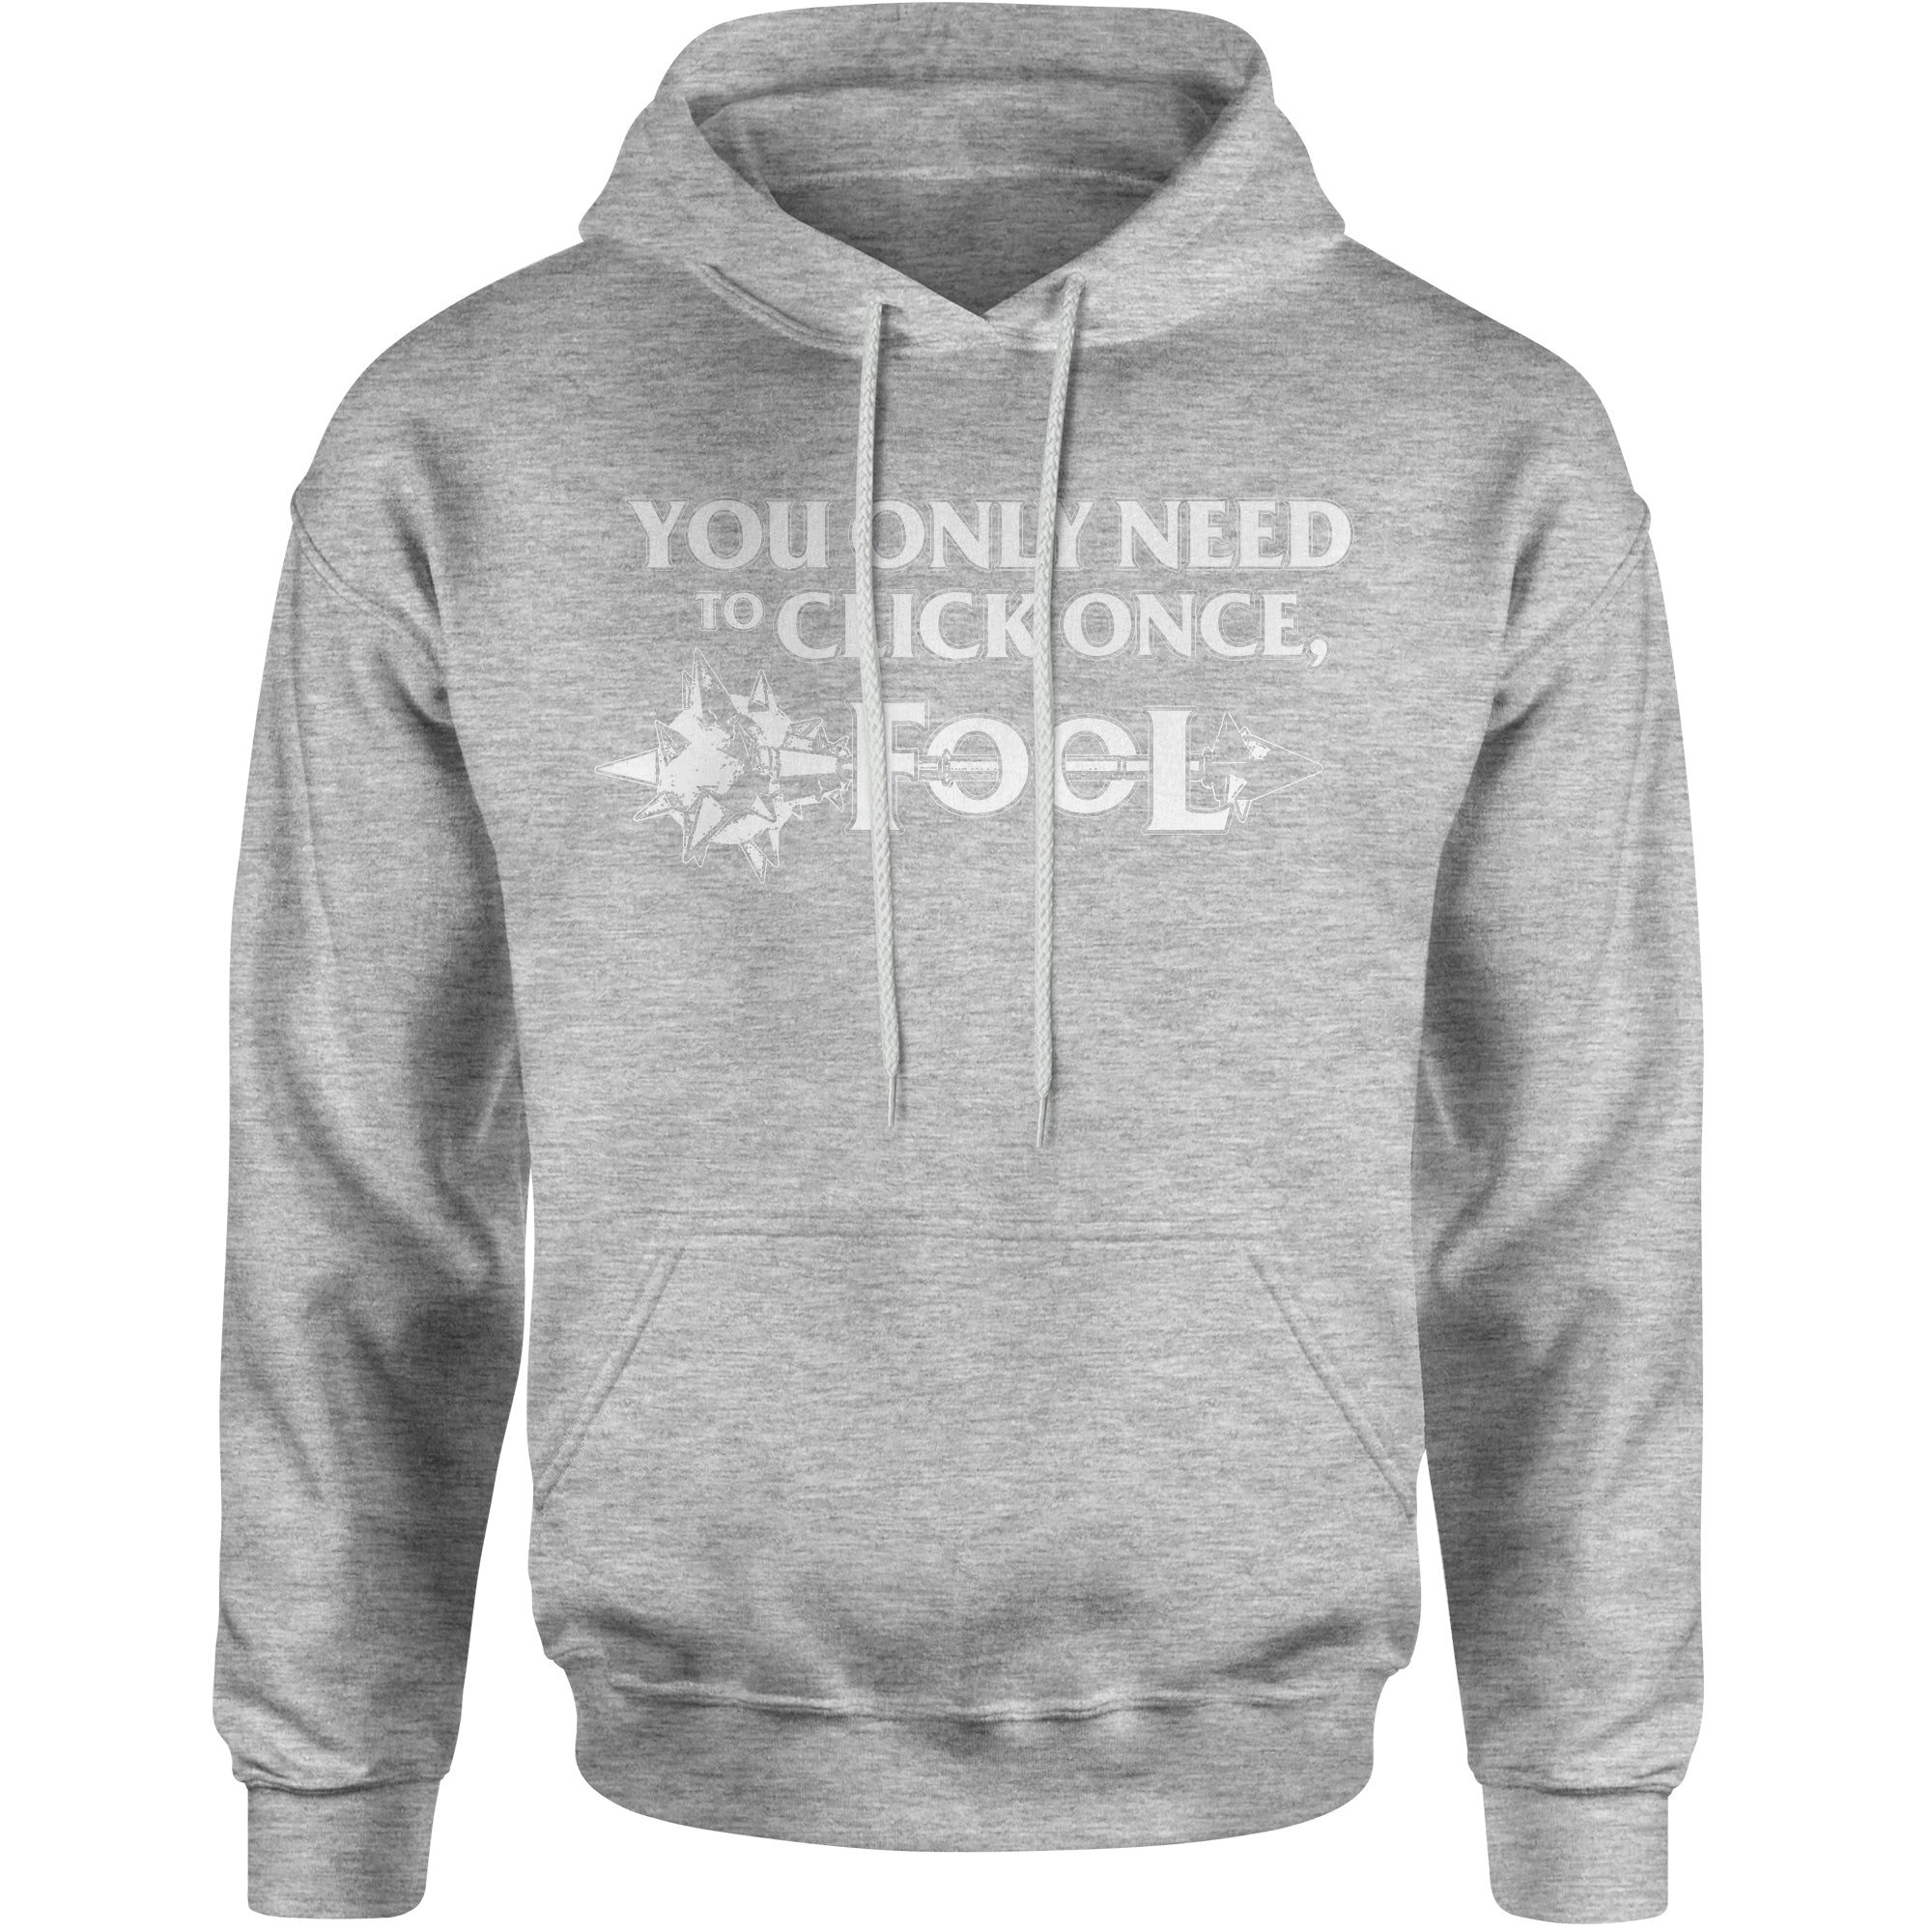 Only Click Once Fool League Champion Mord Quote  Hoodie